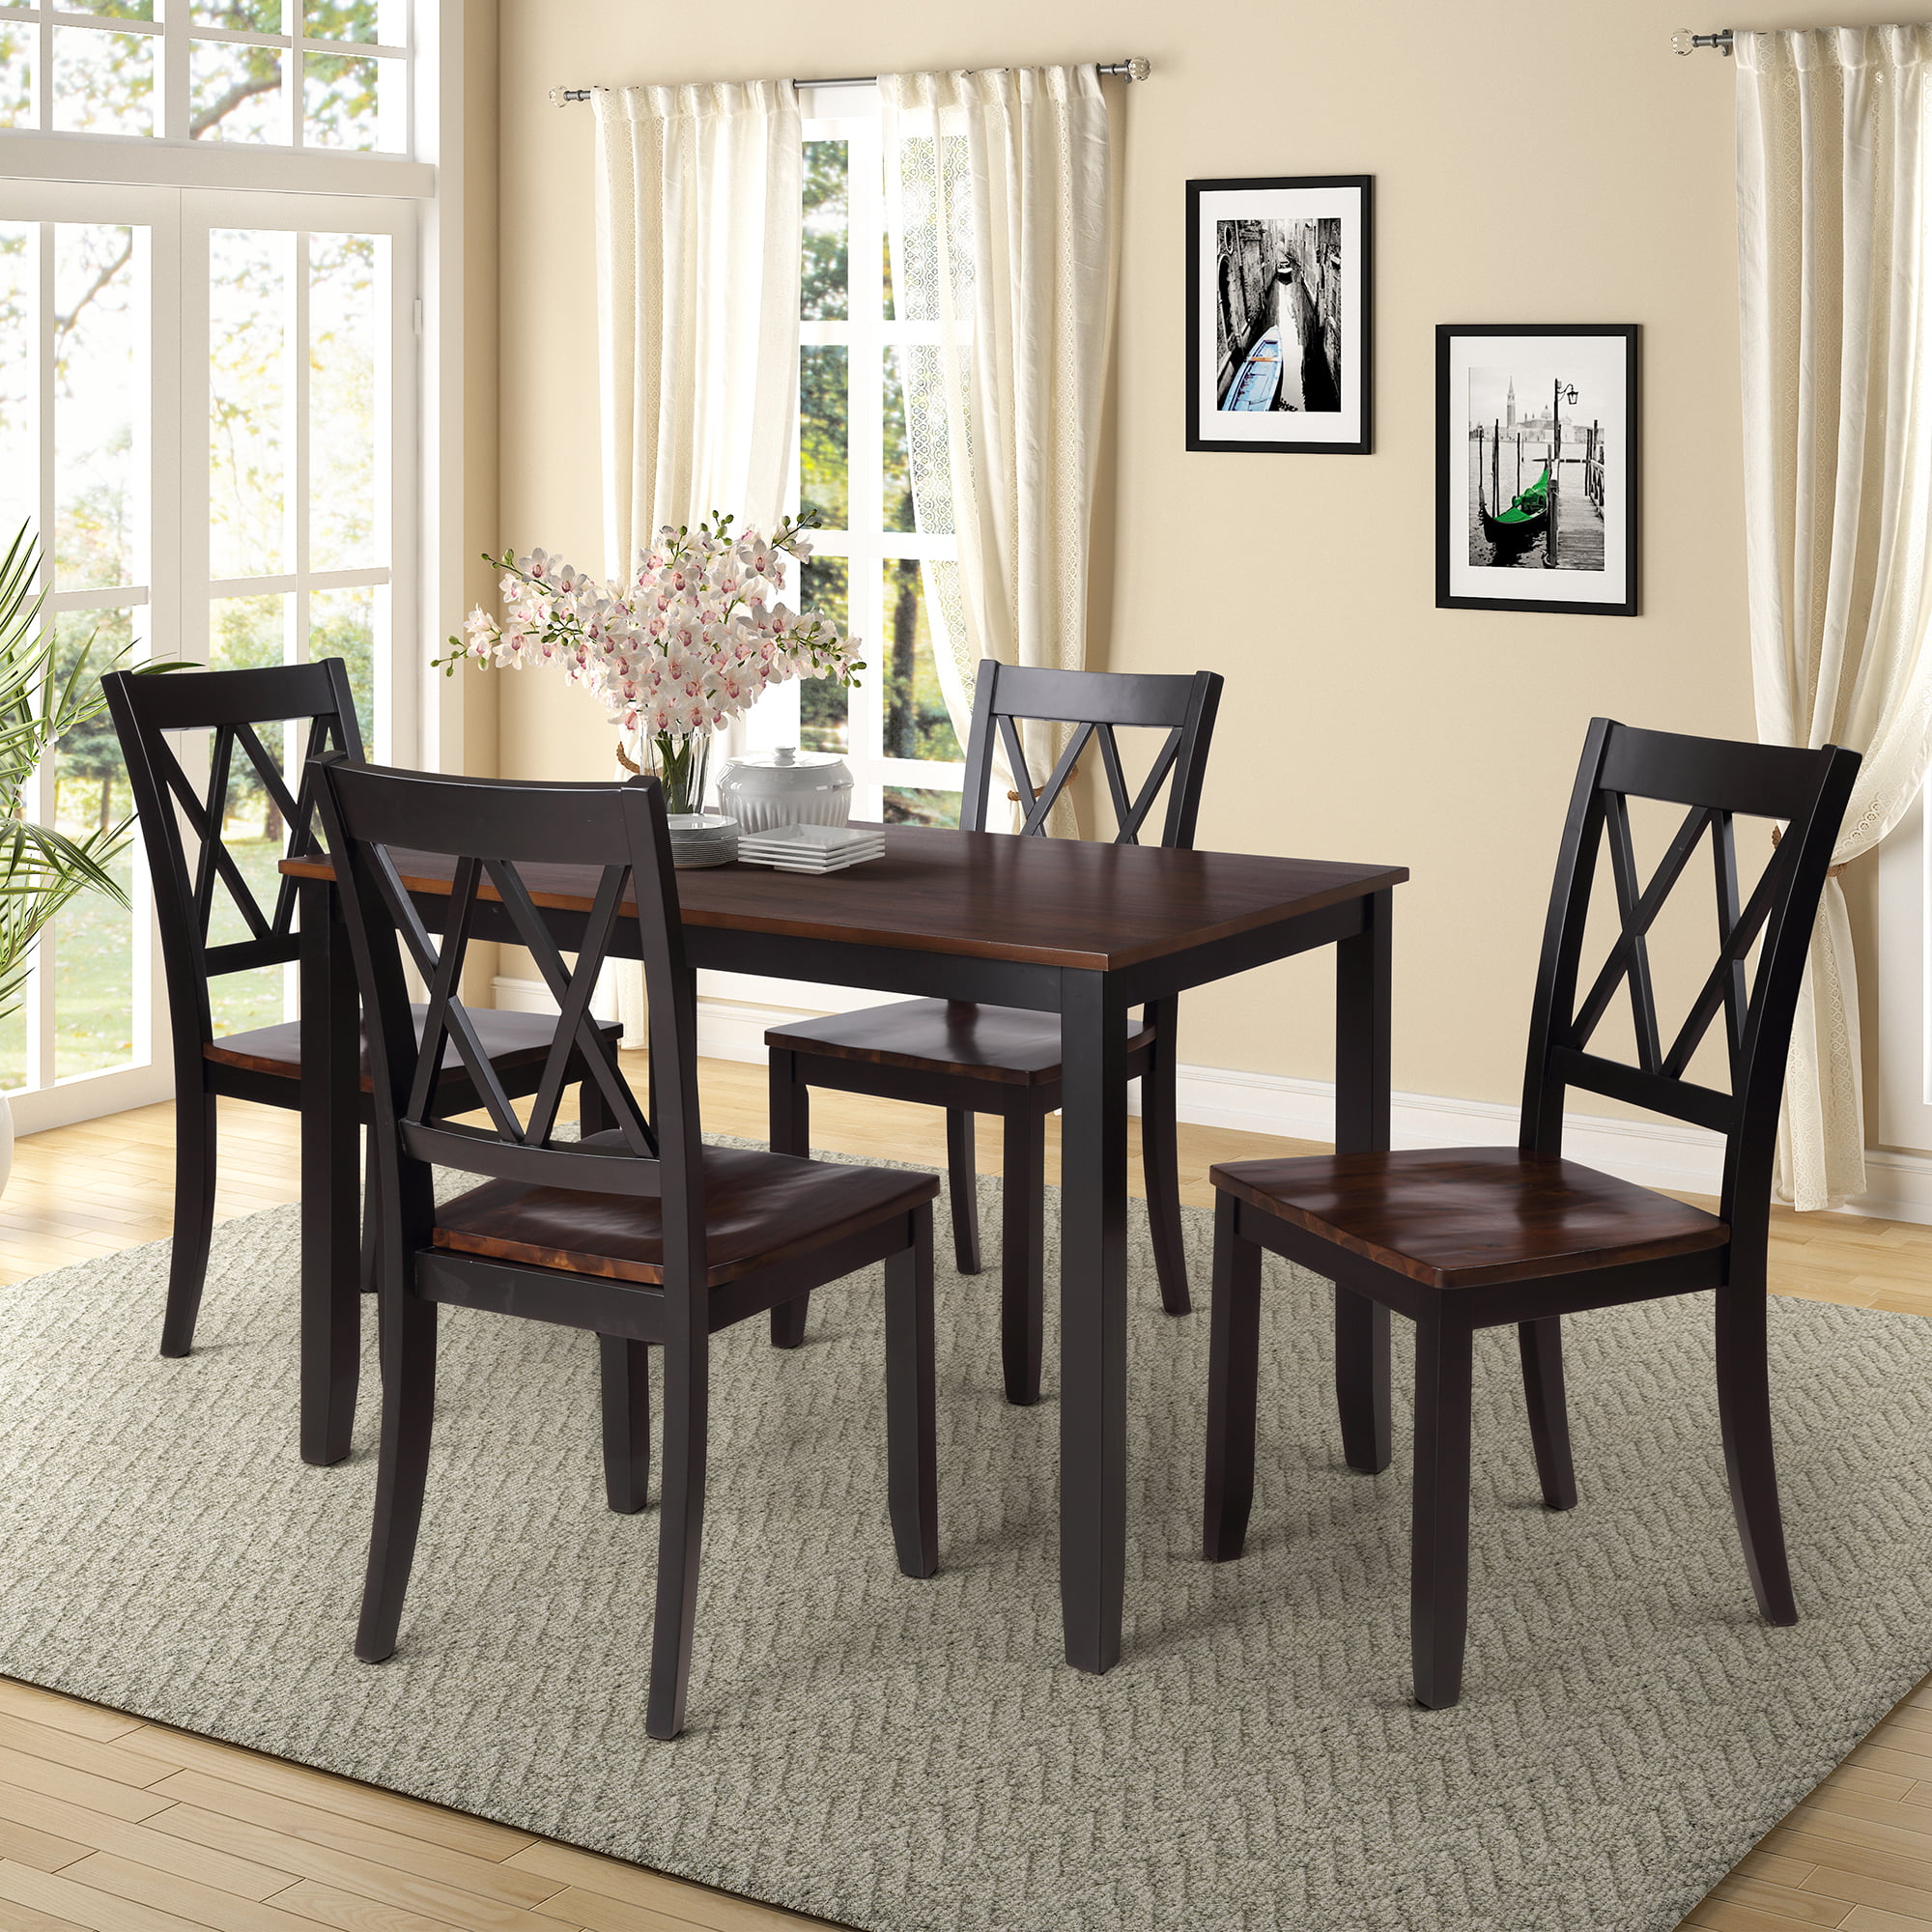  kitchen dinette tables chairs